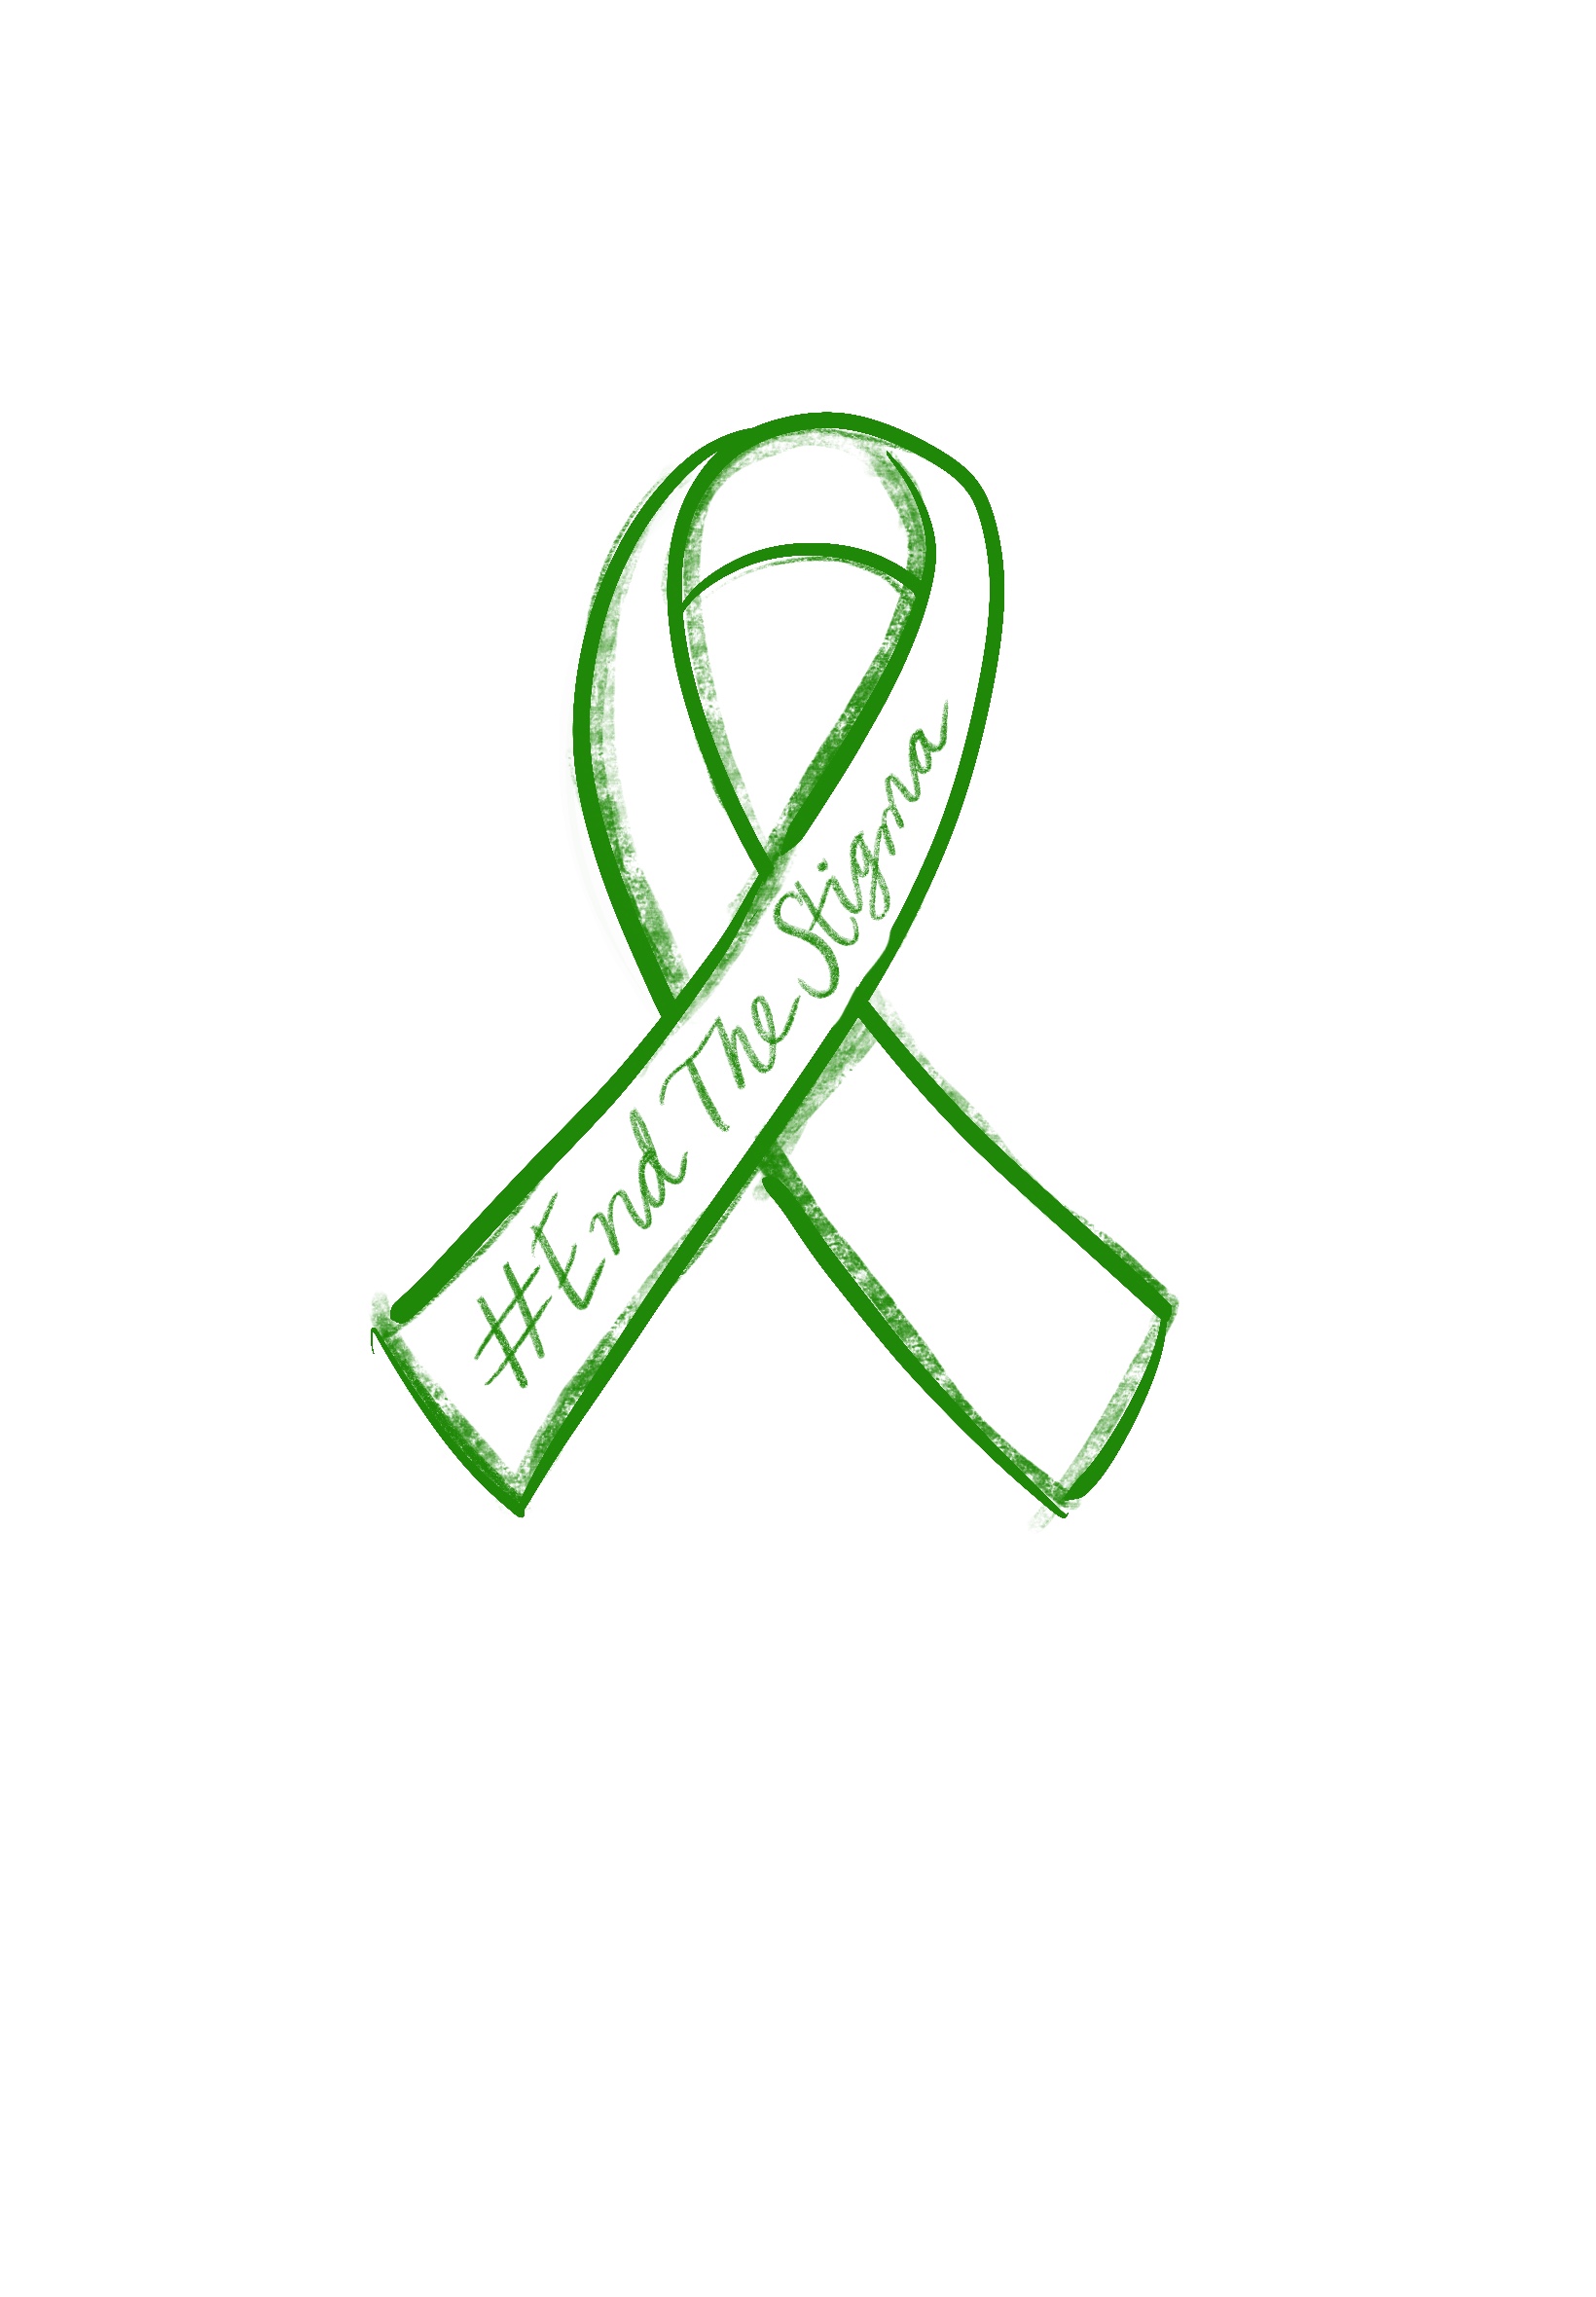 A white background with the green outlined ribbon drawn to say #EndTheStigma in the middle.